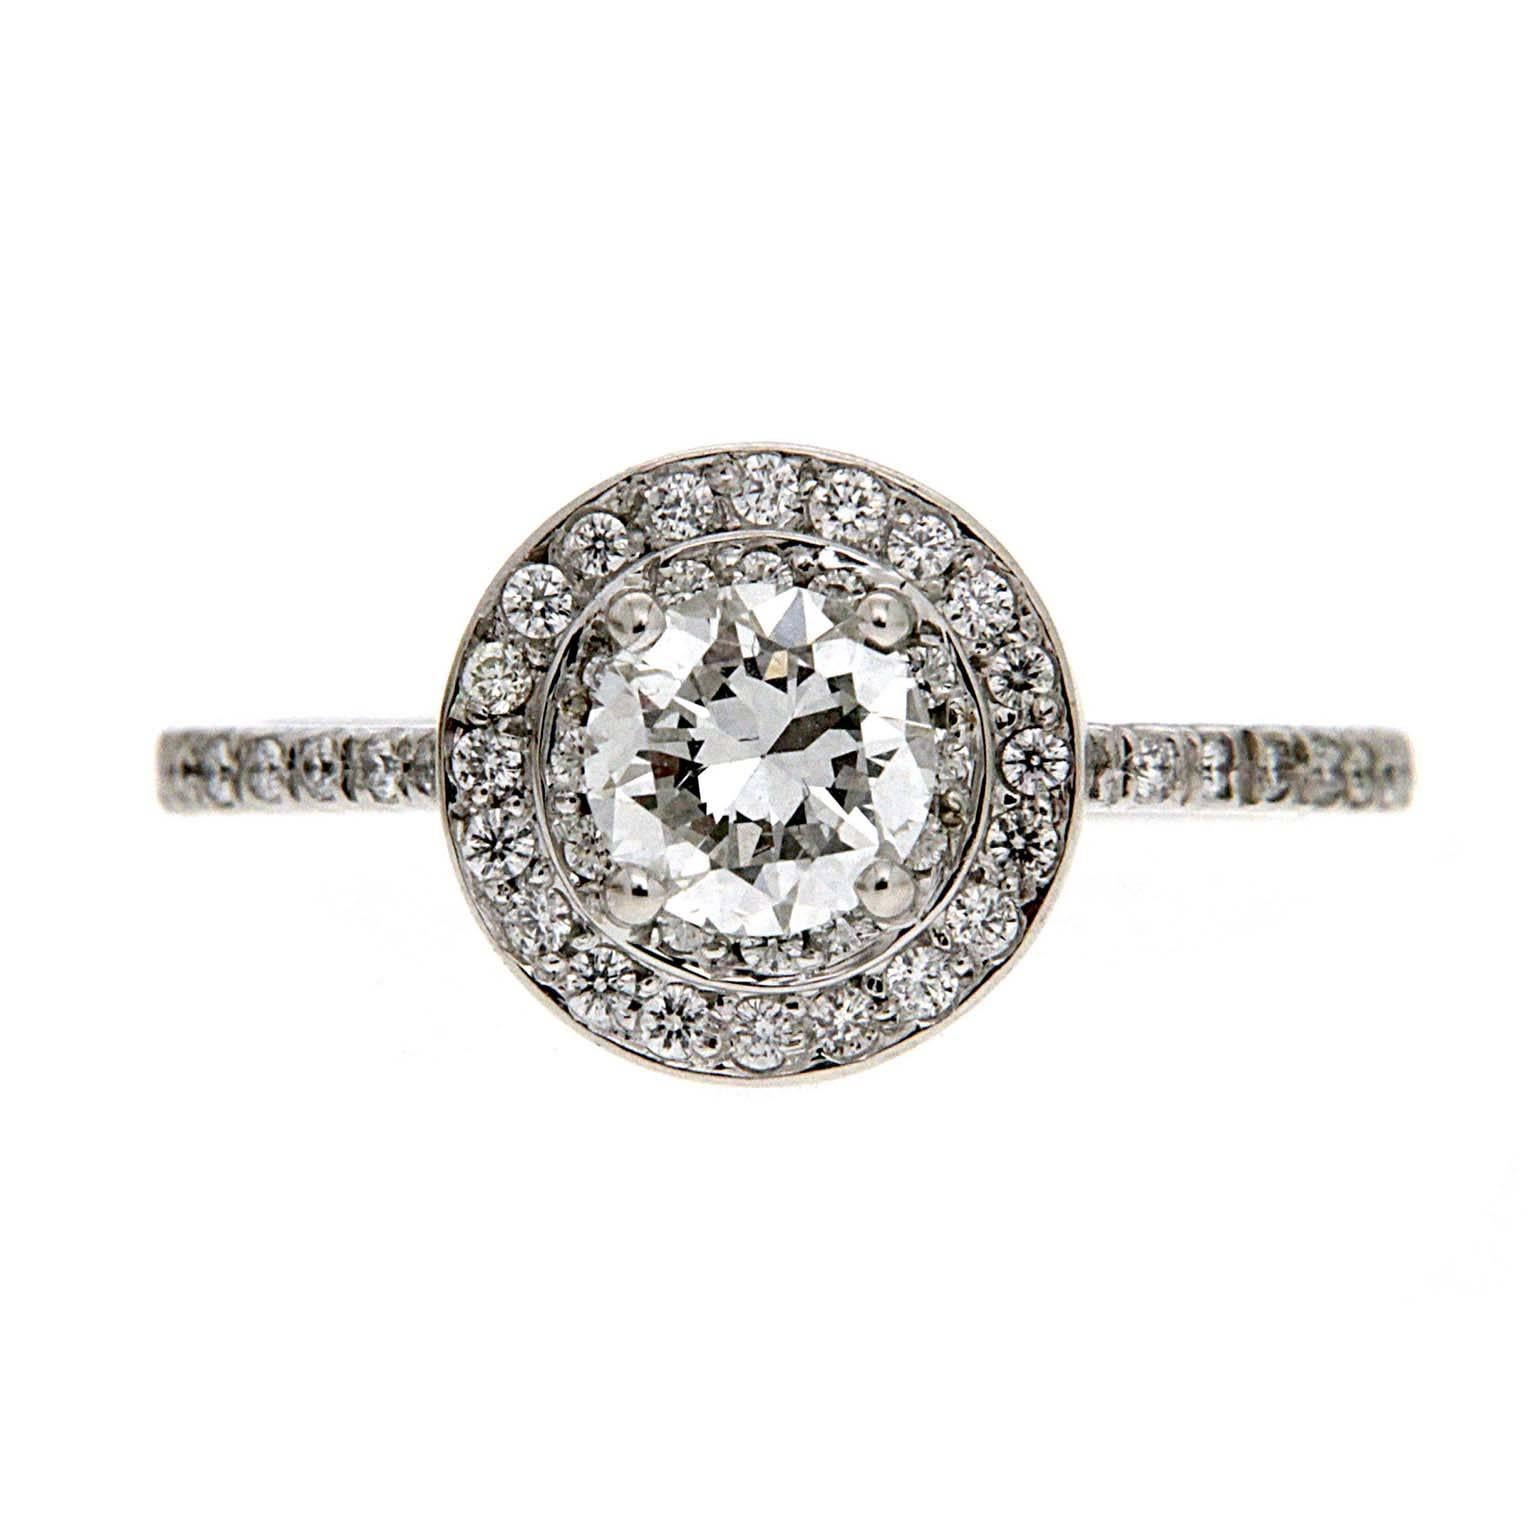 This ring features a 0.52ct Round center diamond GIA Certified (E VS2) and Double Halo with micro pave on the shank. The ring is finished in 18kt white gold. 

Diamond Total Weight: 0.87ctw

GIA certification number: 5172527944